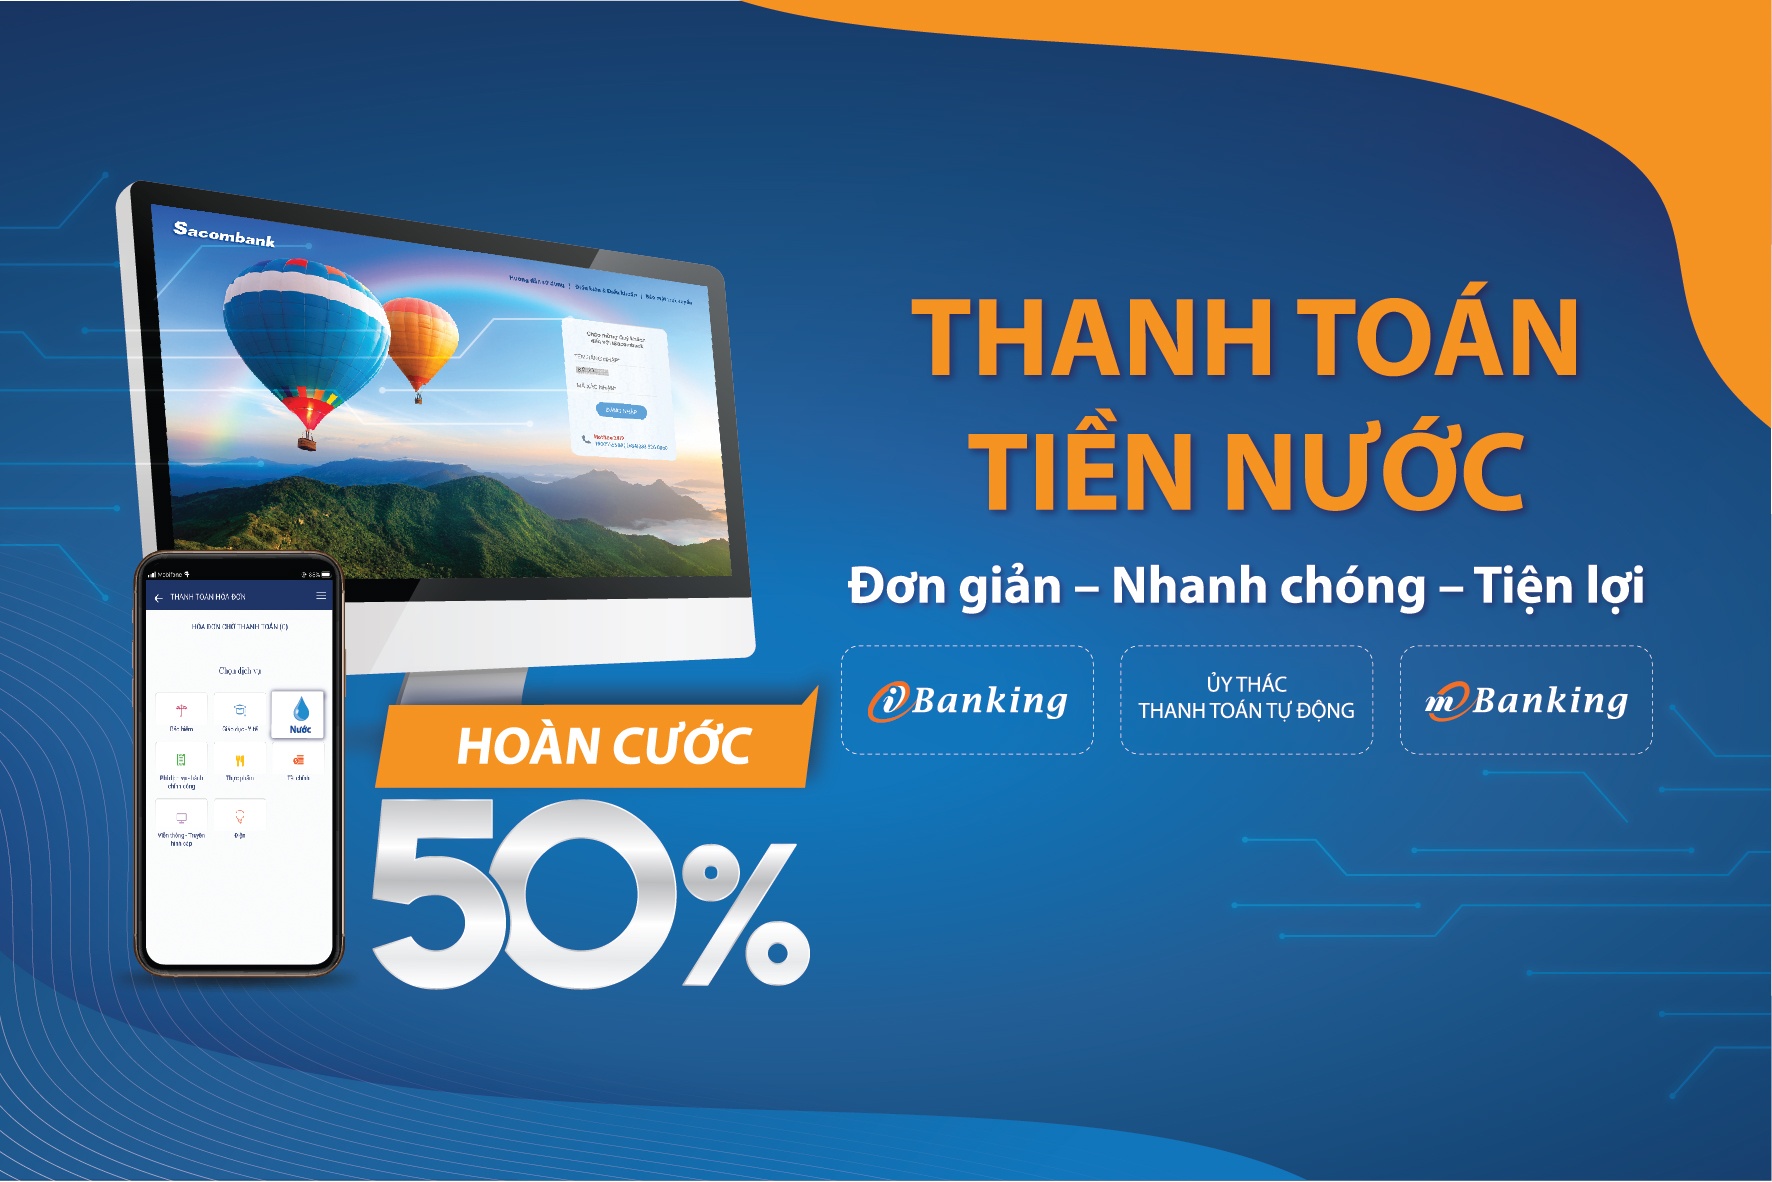 thanh toan tien nuoc hoan cuoc 50 vo i sacombank